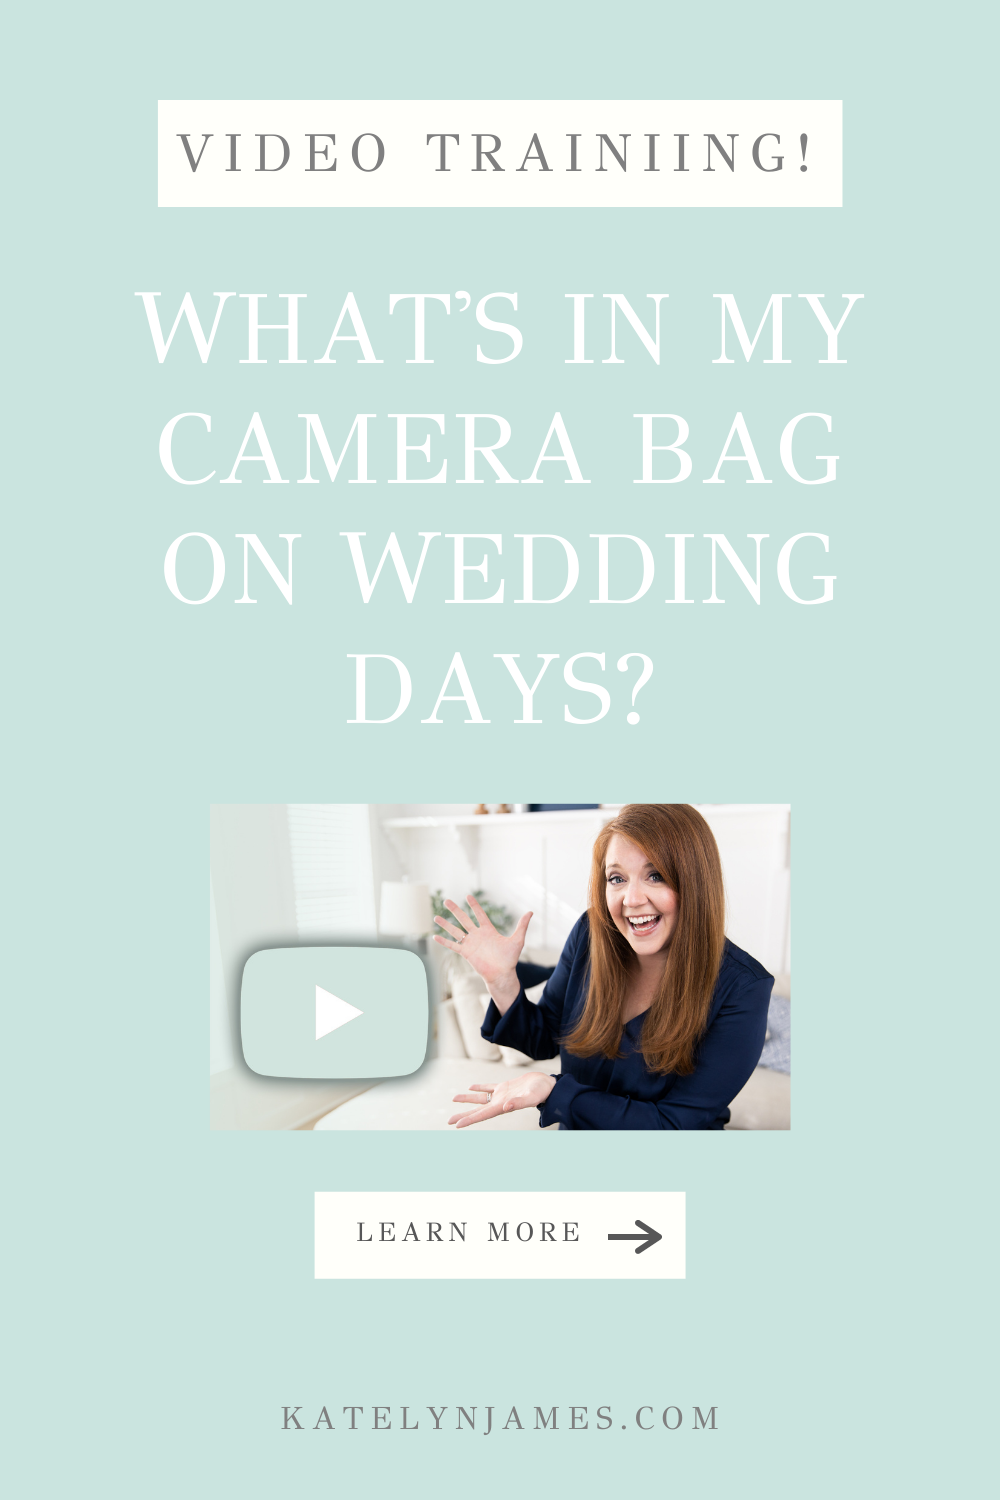 What's in My Camera Bag on Wedding Days?